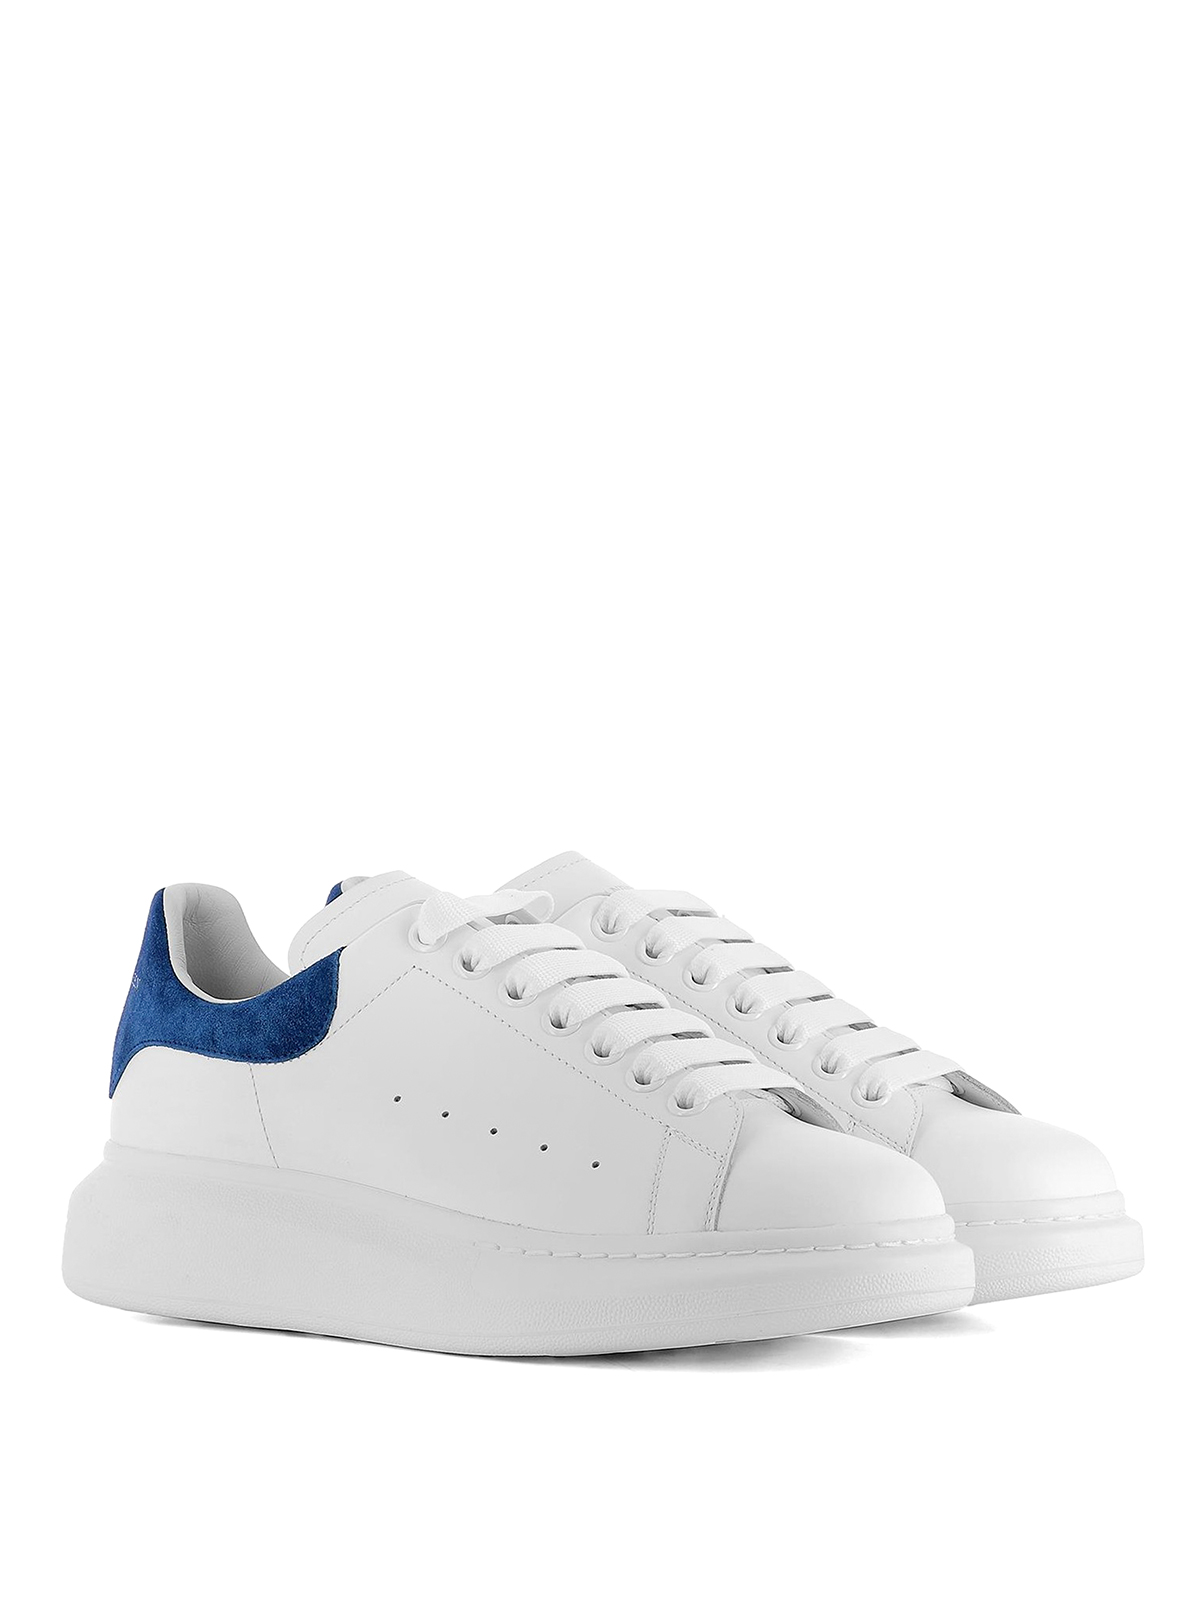 alexander mcqueen trainers white and blue